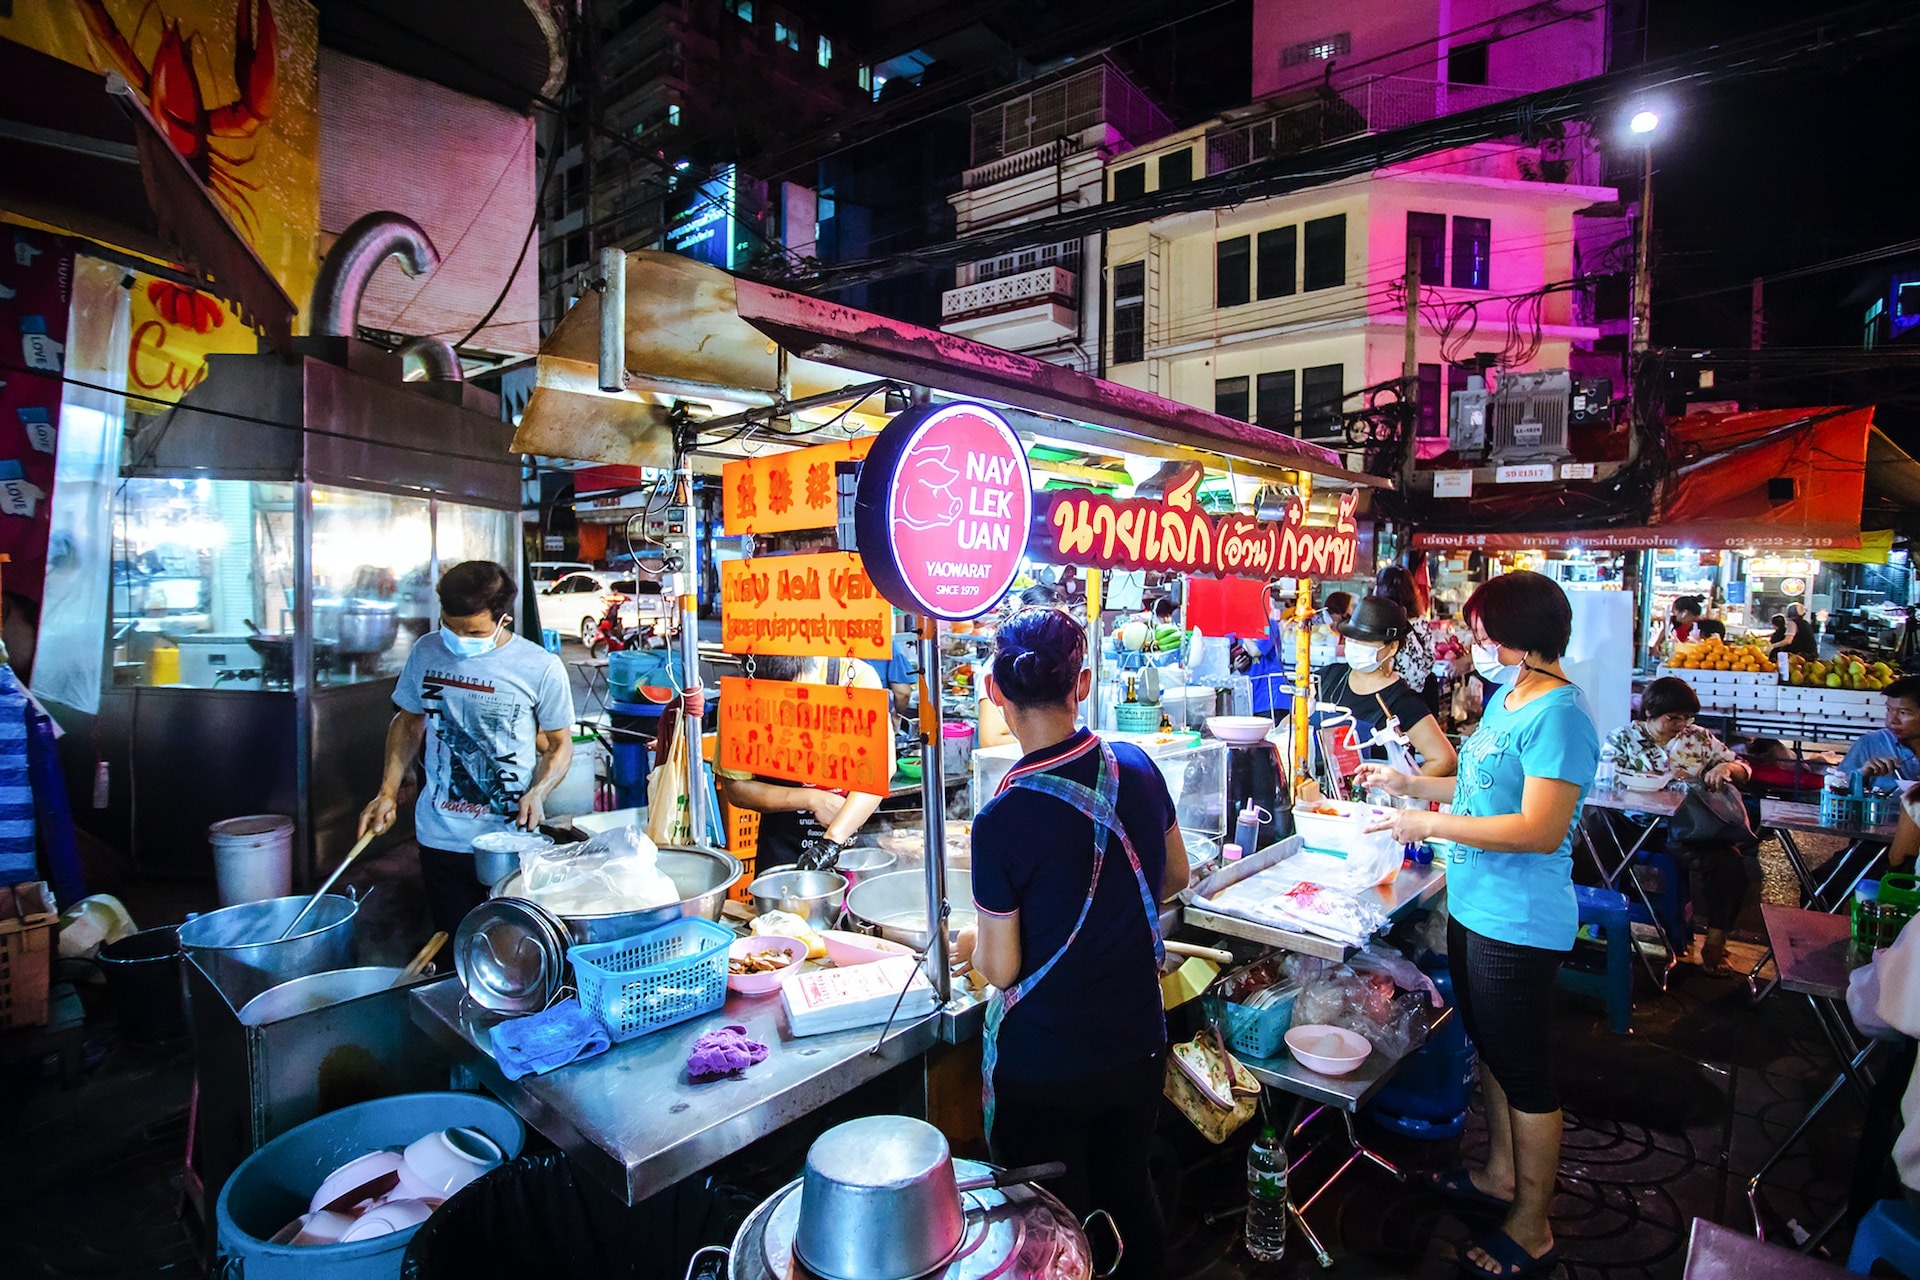 Thailand, Bangkok, Bangkok street food, china town, noodles, rolled noodles, people images & pictures, human, market, bazaar, shop, shopping, creative common images